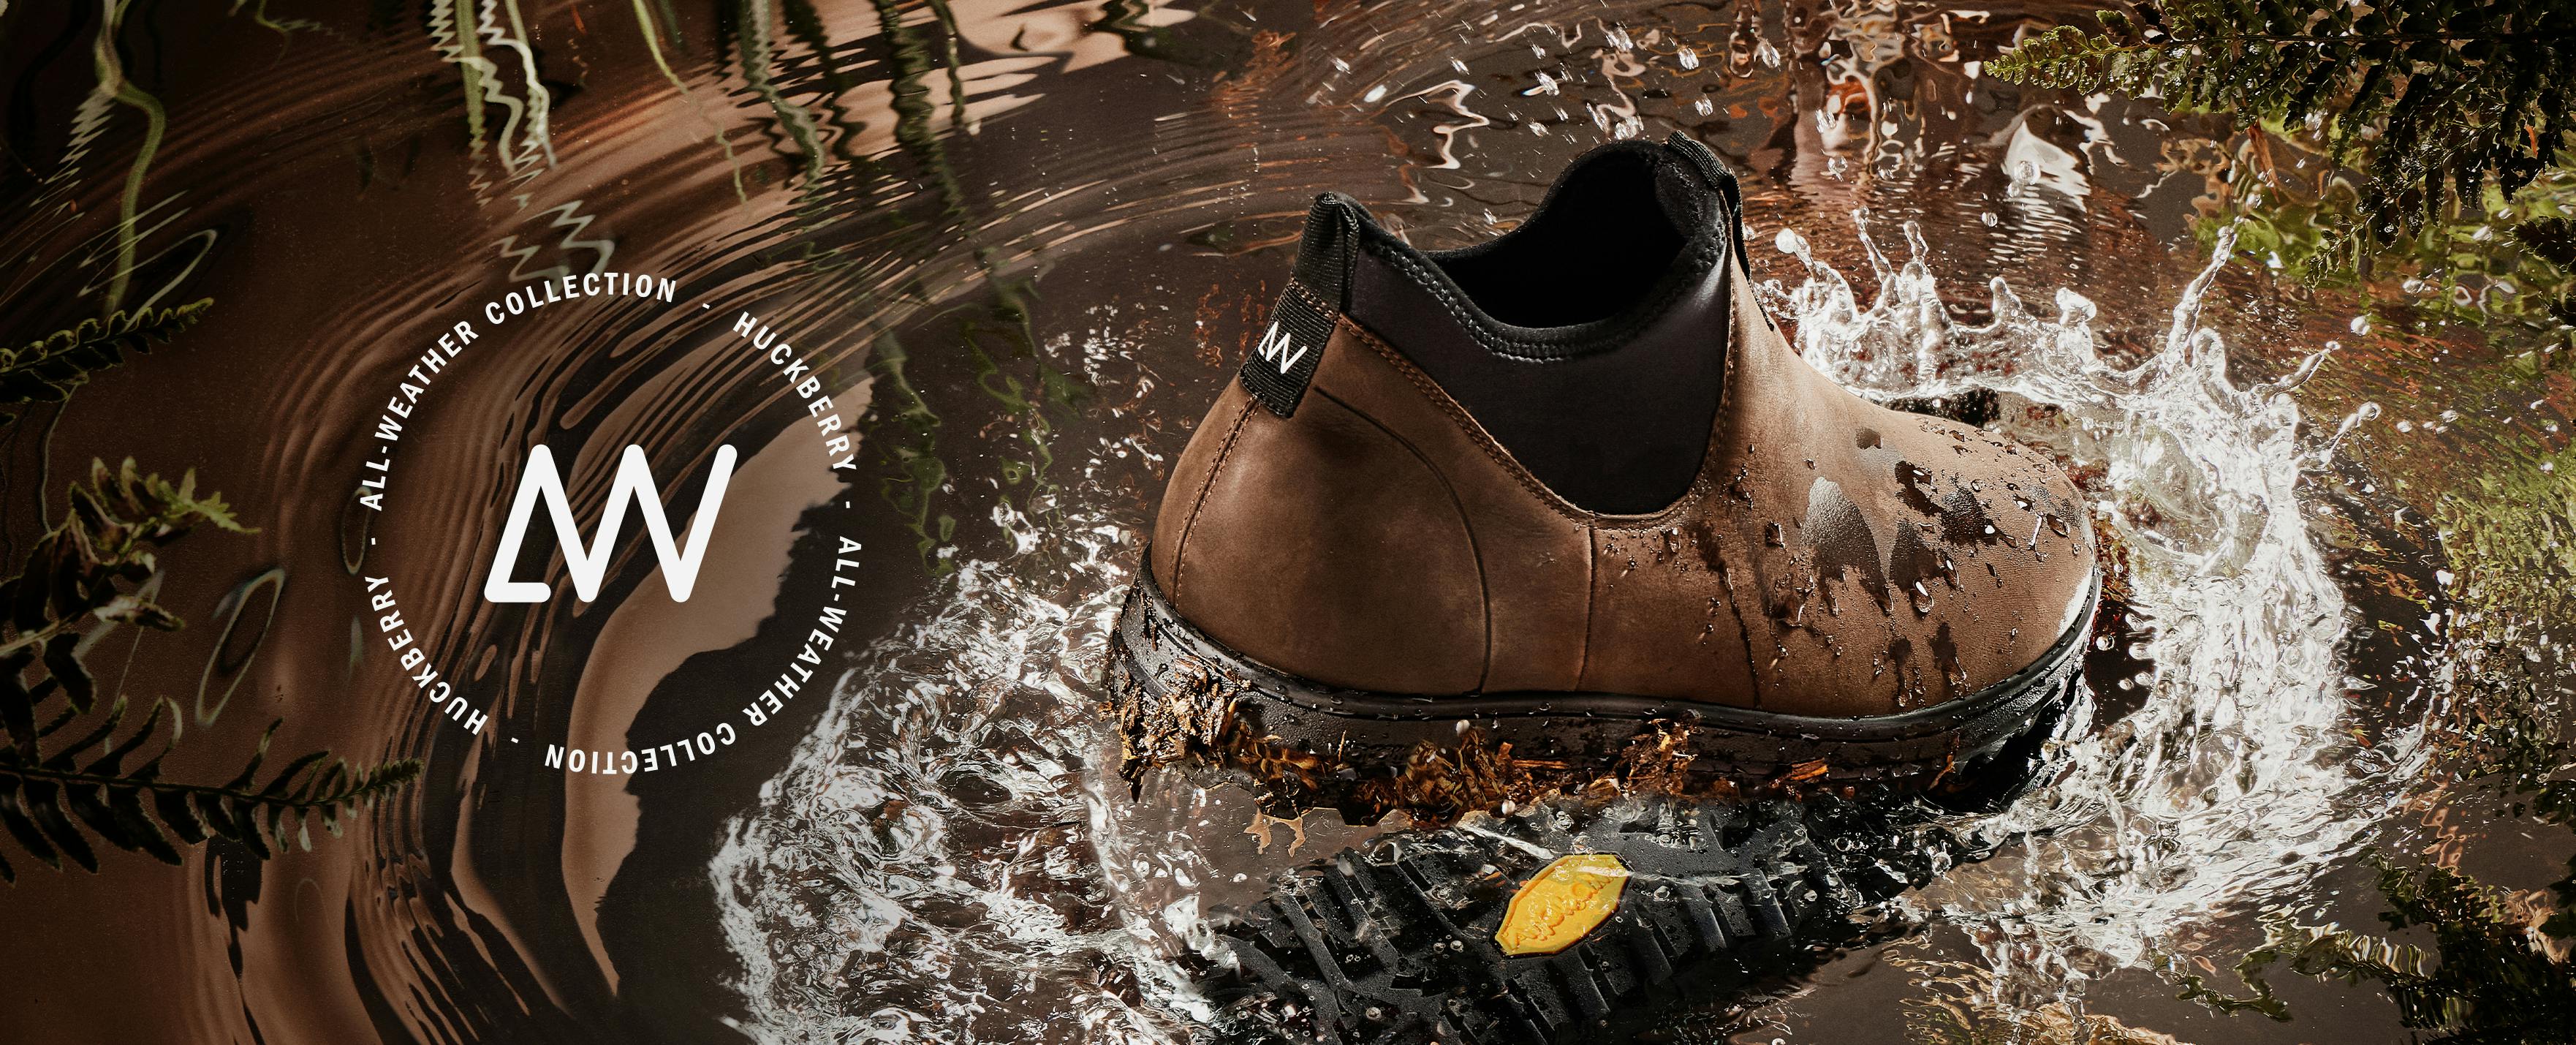 All Weather brown boot splashing in water